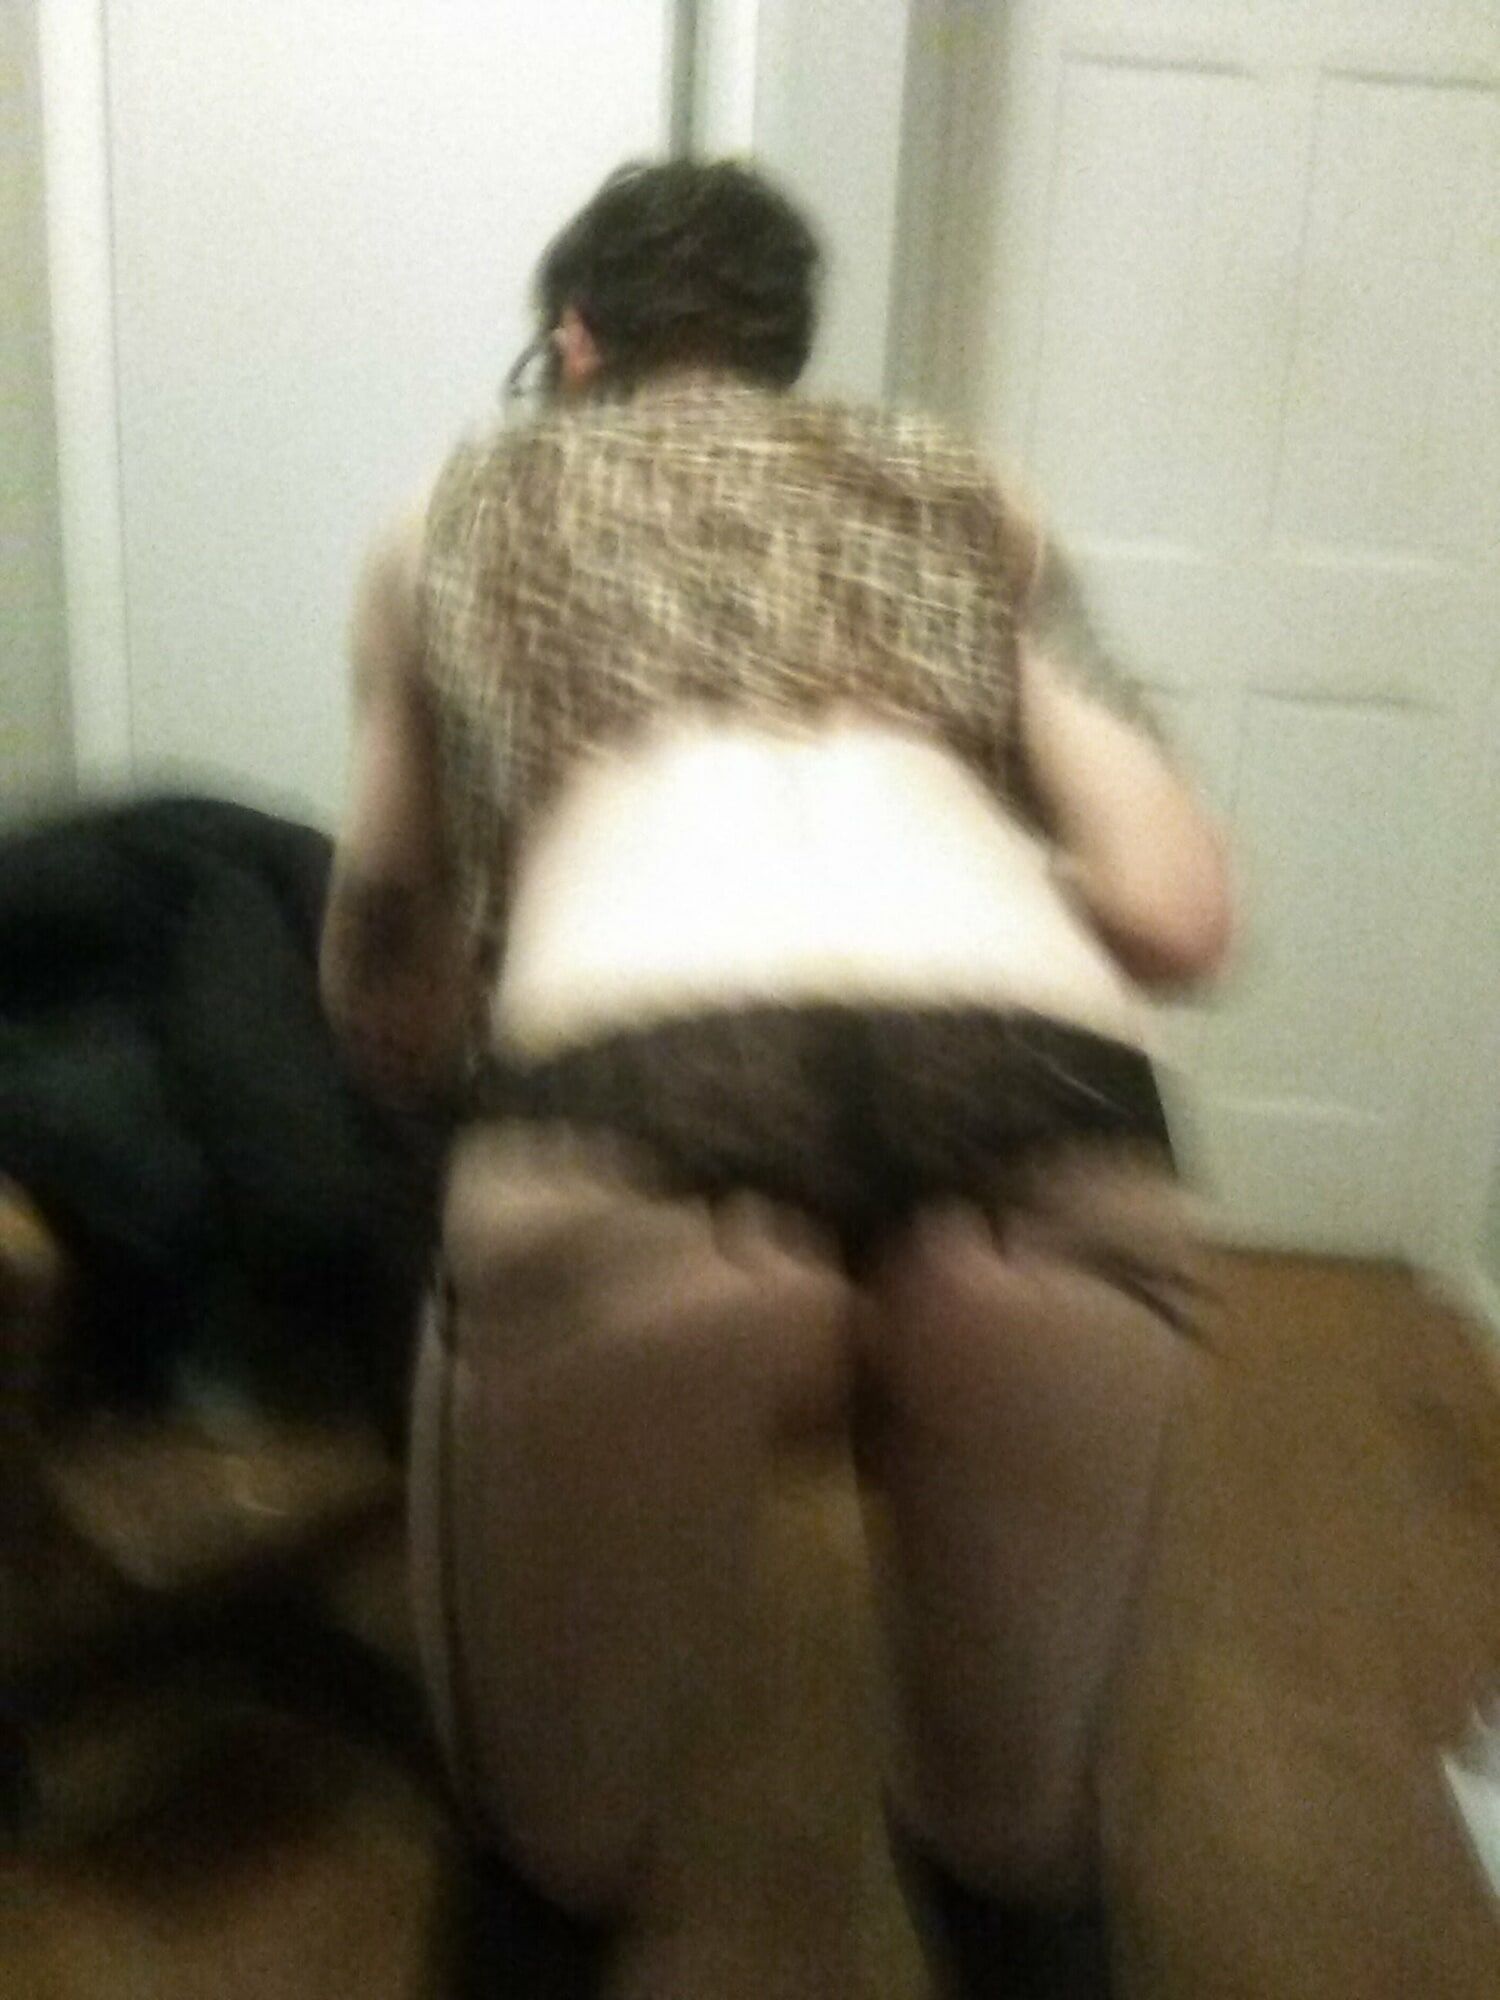 CD in ex gf apt with stranger trying on her clothes  #3